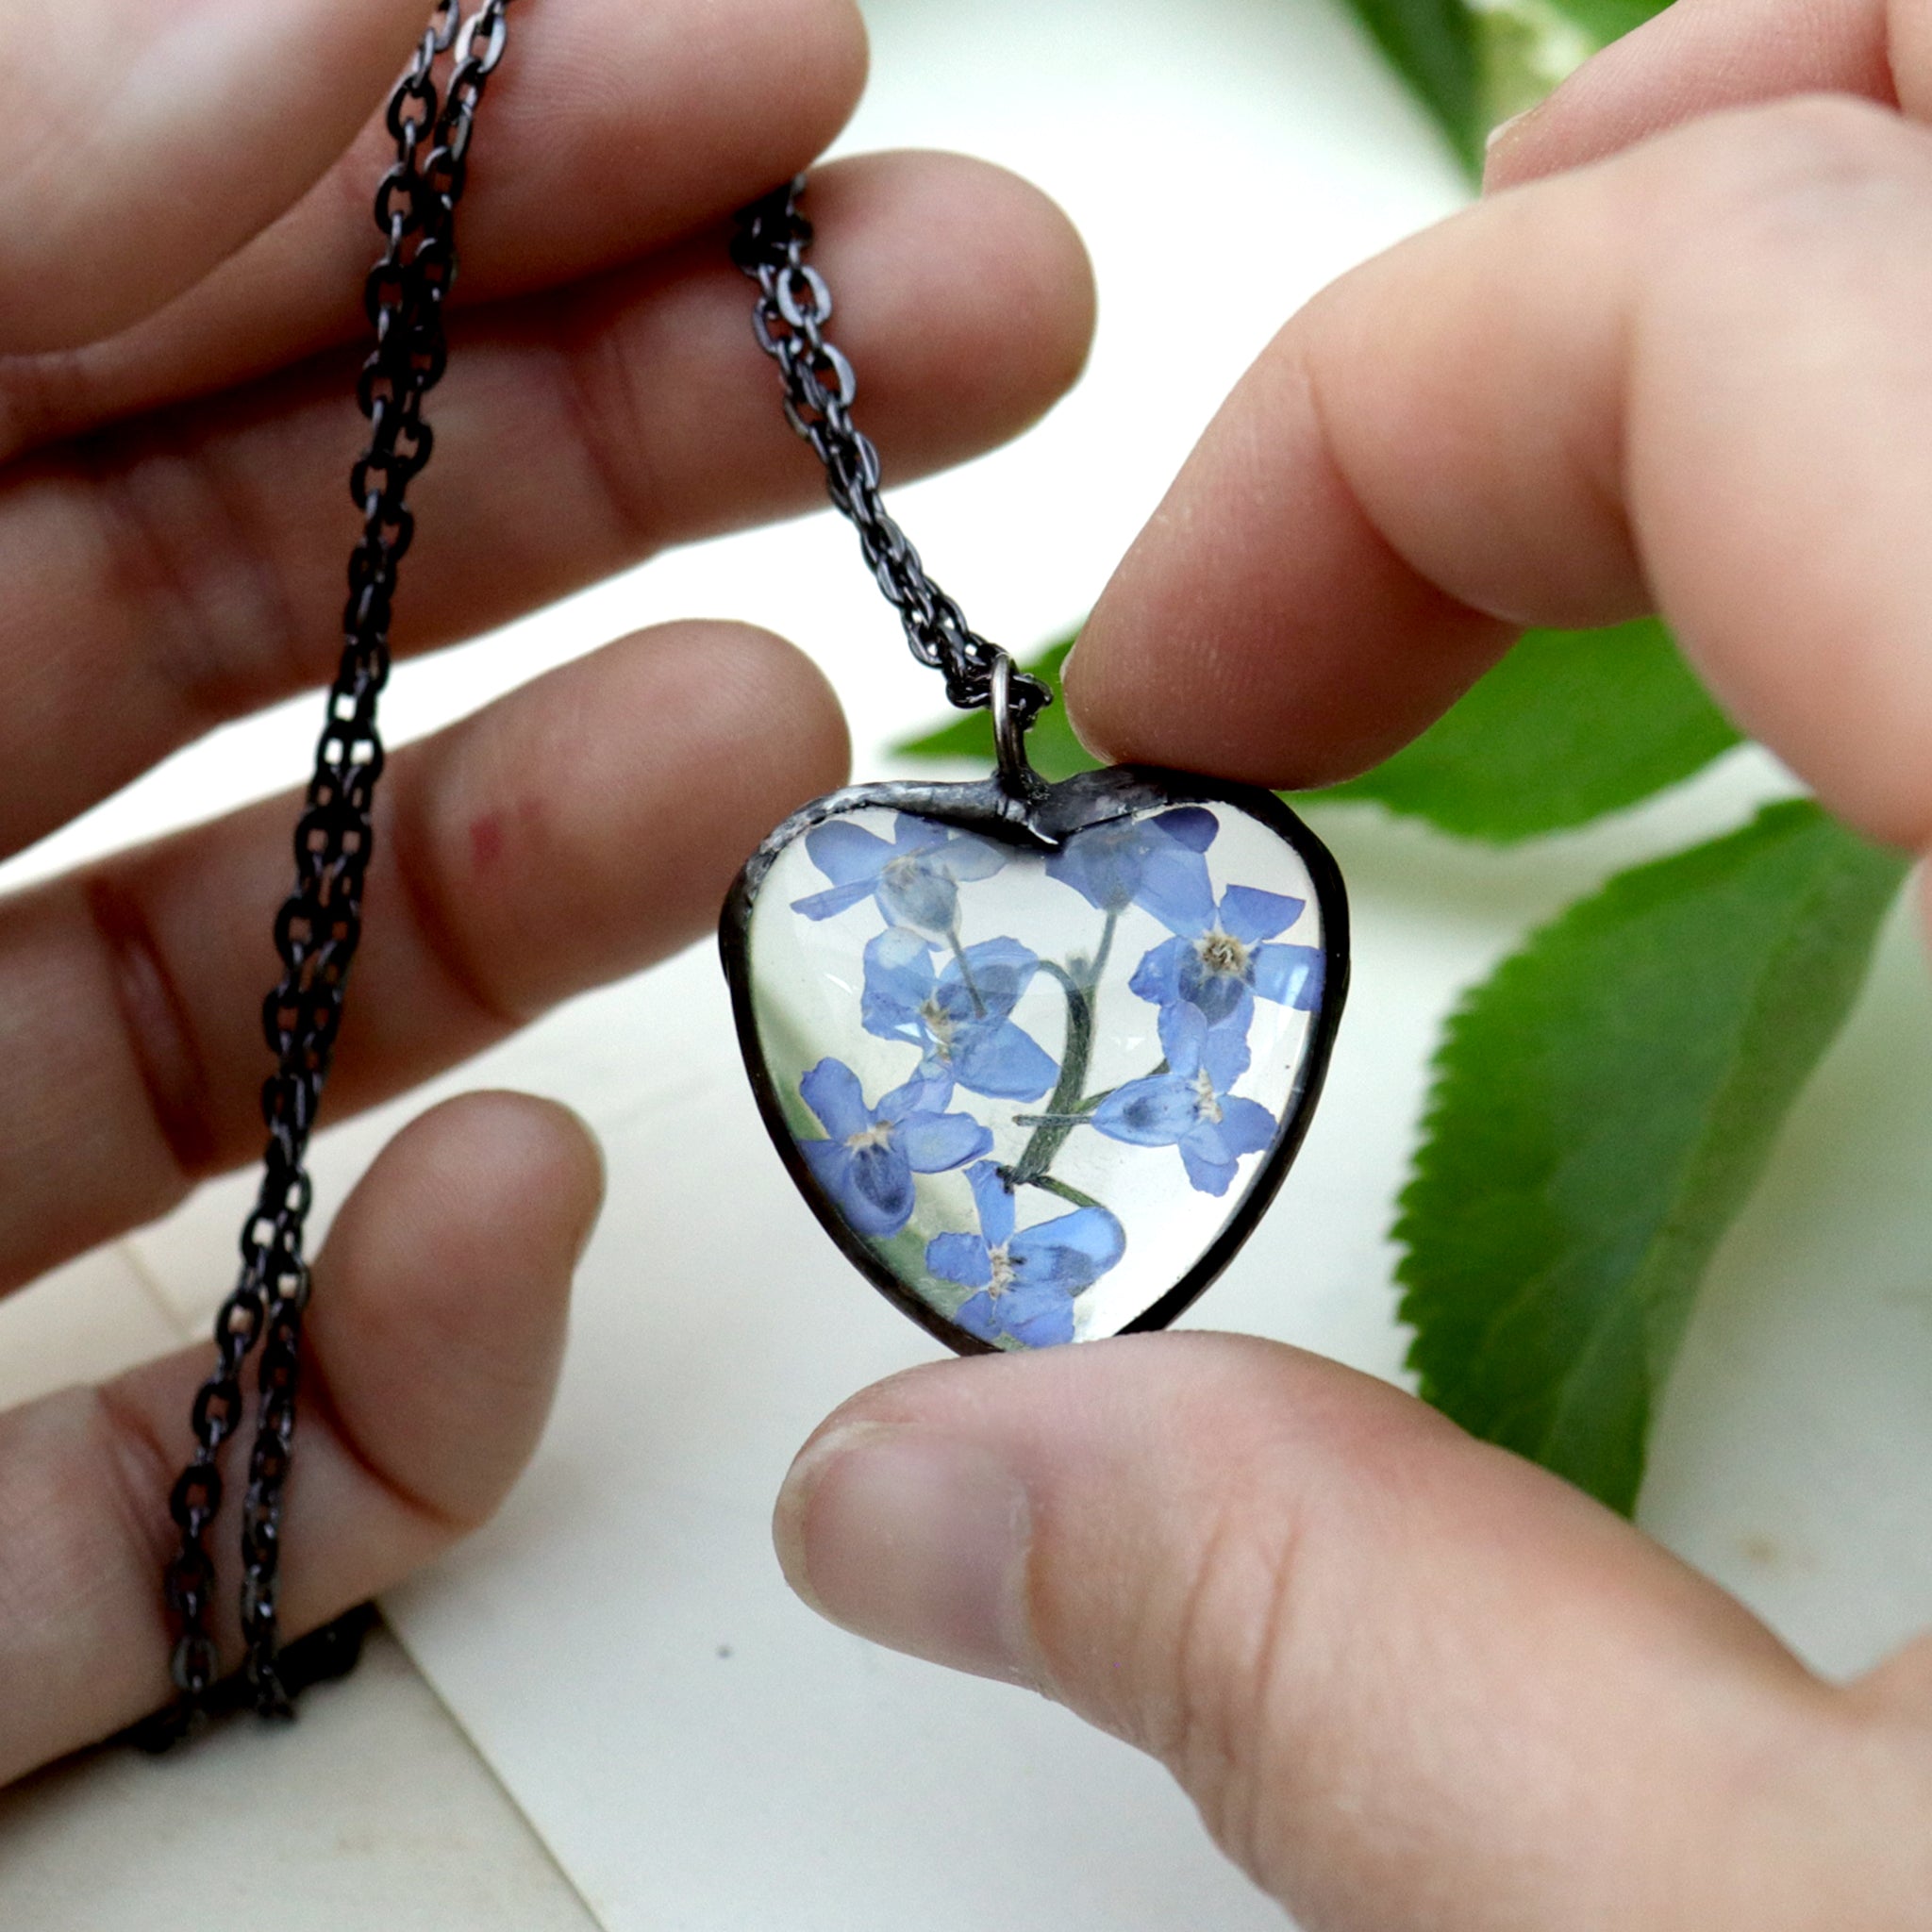 Forget-me-not heart shaped necklace being hold between thumb and index chain held by other hand